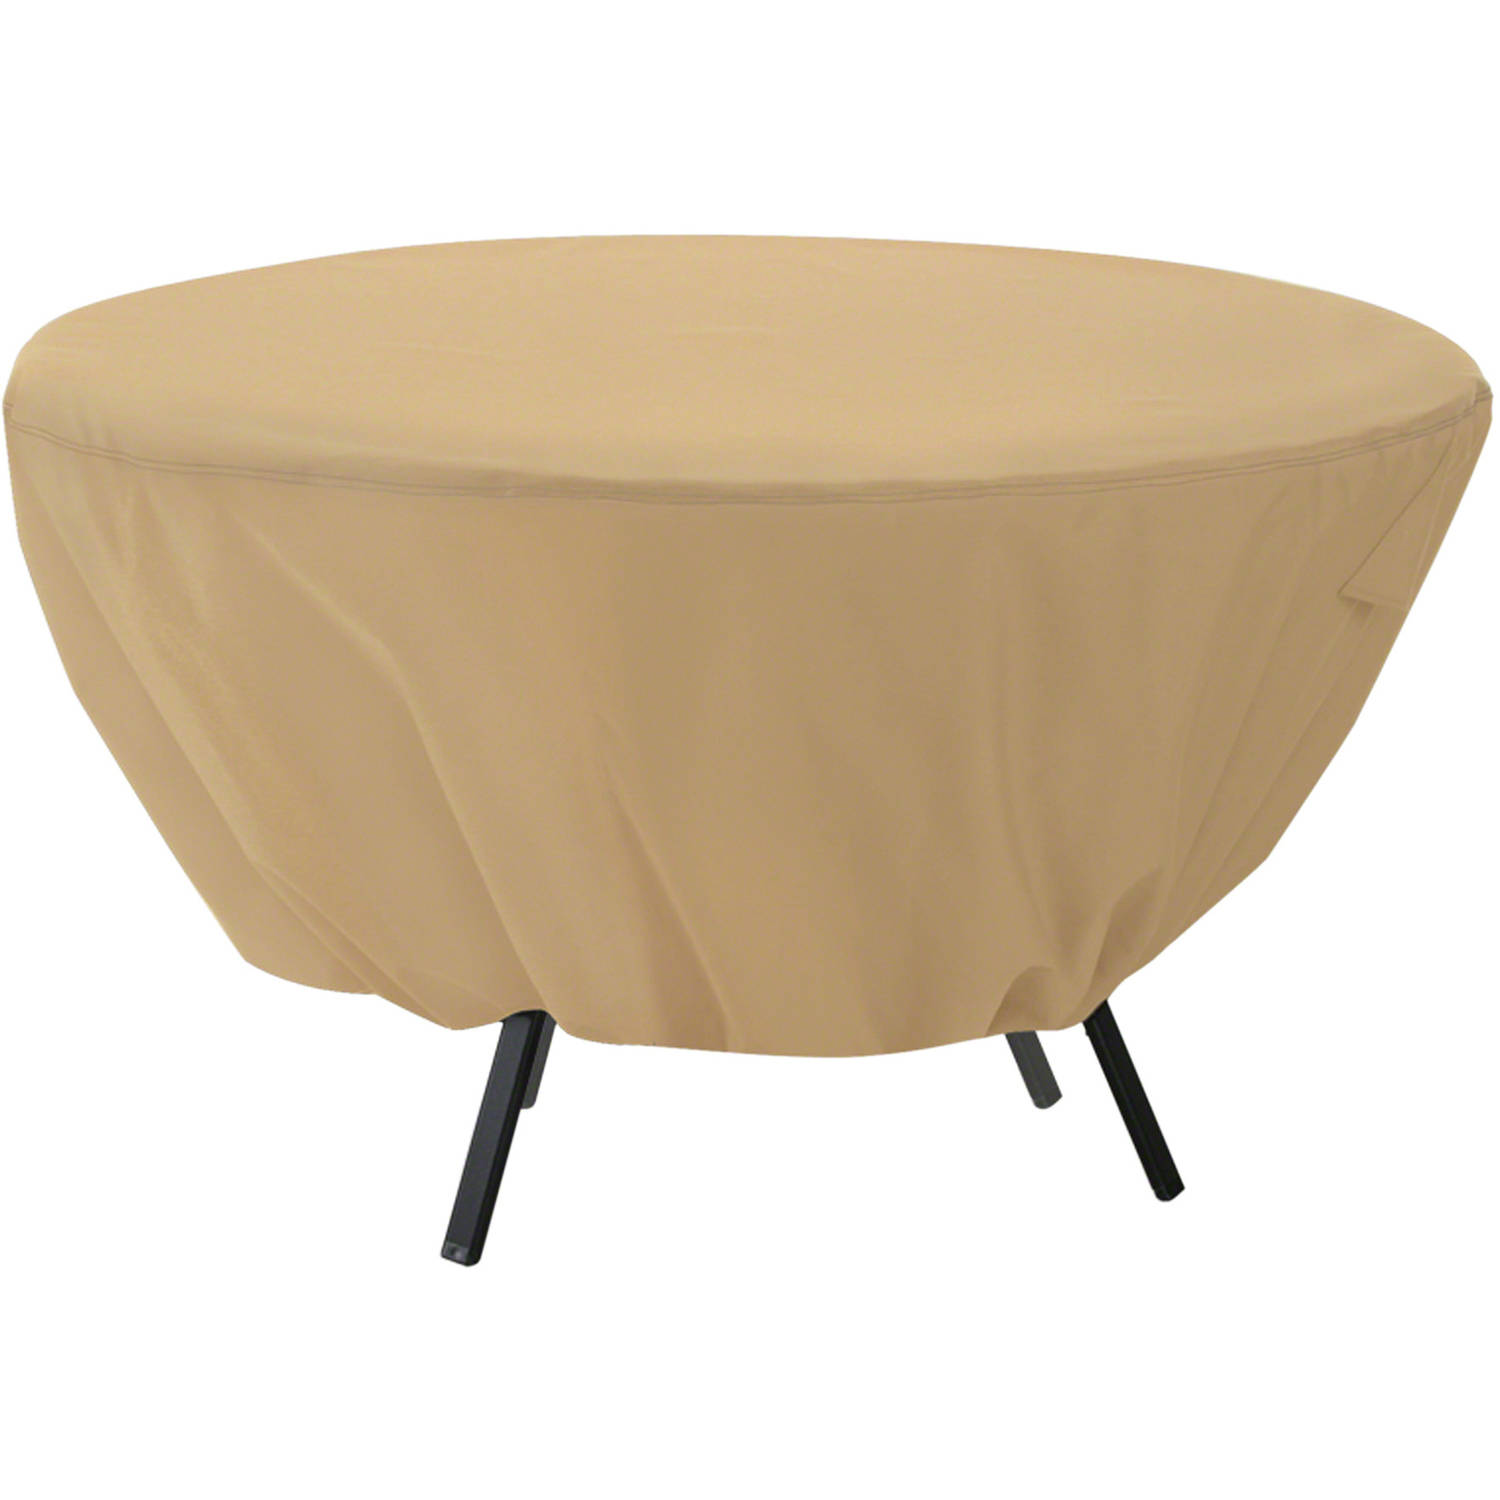 Classic Accessories Terrazzo Water-Resistant 50 Inch Round Patio Table Cover - image 1 of 8